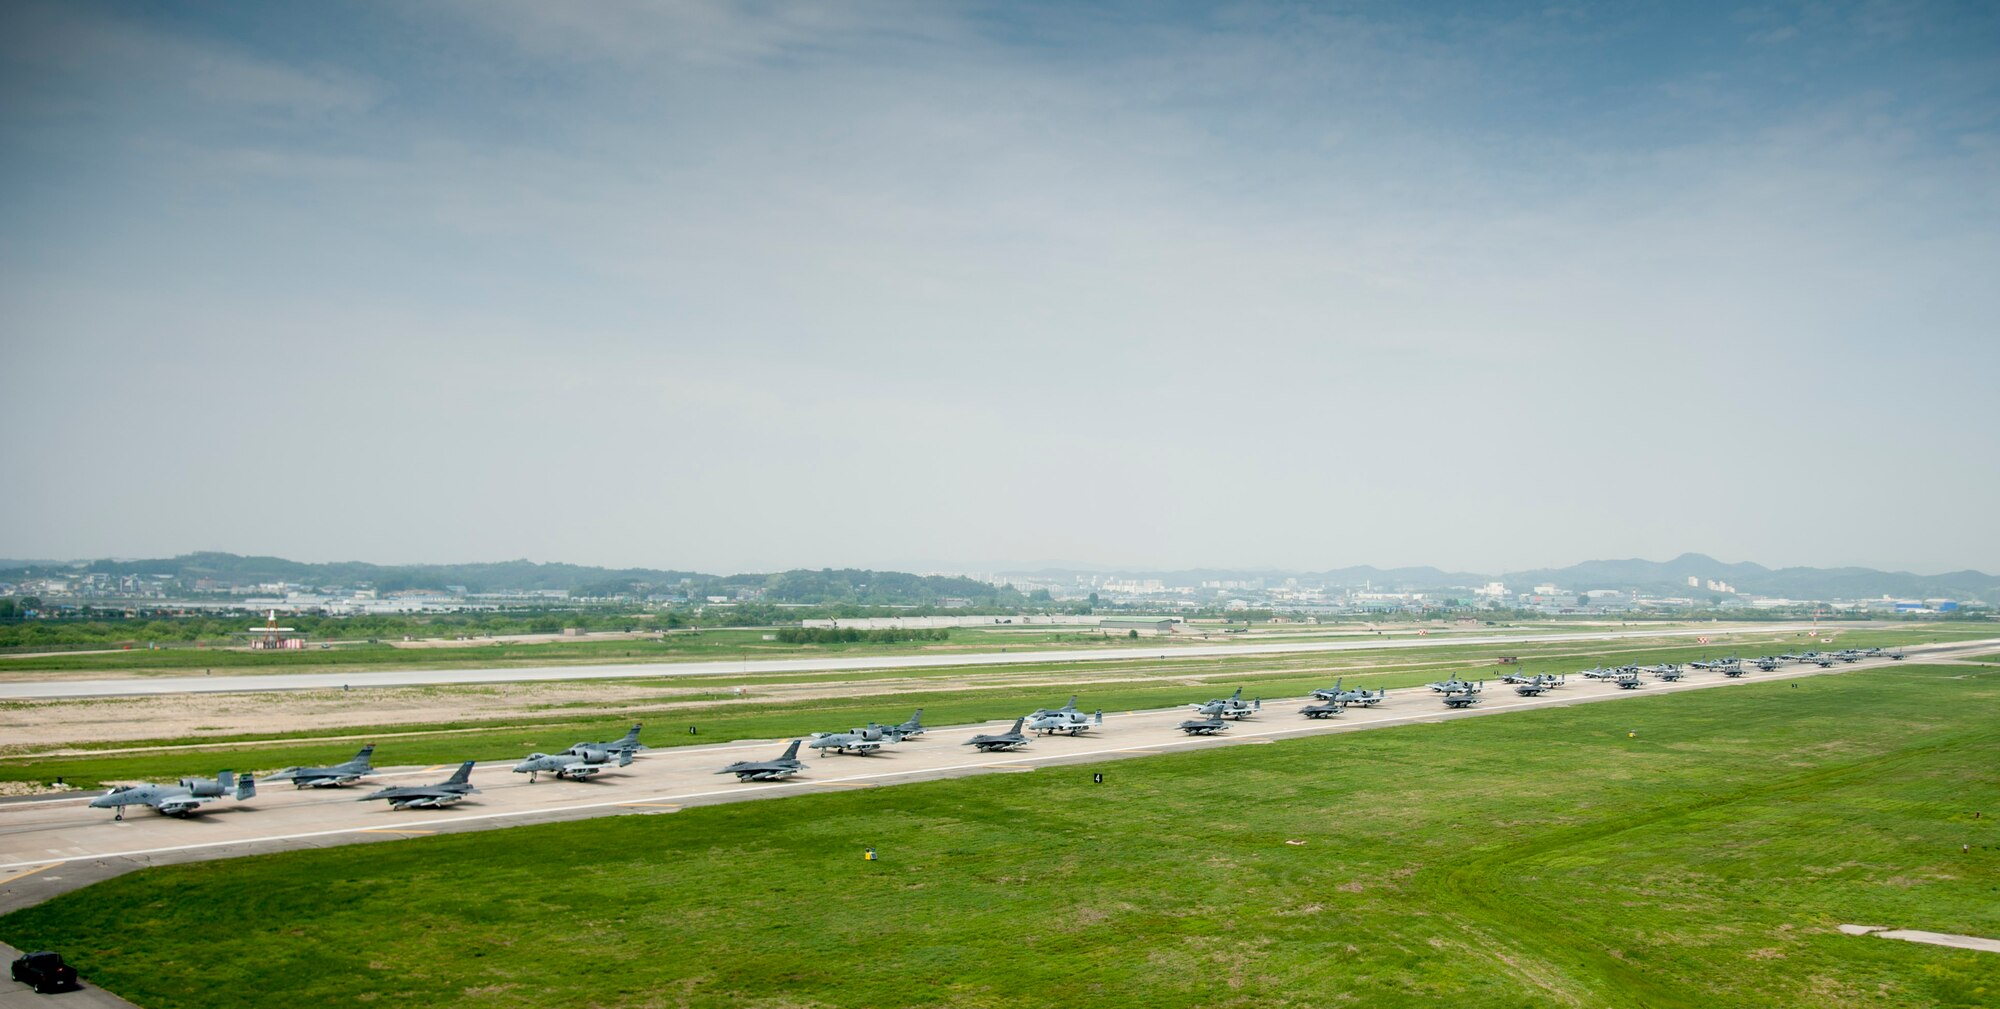 A-10 Thunderbolt II and F-16 Fighting Falcon fighter aircraft perform an 'Elephant Walk' on the runway this week during Exercise Beverly Herd 16-01 at Osan Air Base, Republic of Korea. The Elephant Walk was a demonstration of U.S. Air Force capabilities and strength and showcases the wing's ability to generate combat airpower in an expedient manner in order to respond to simulated contingency operations. The A-10 Thunderbolt II aircraft are the 25th Fighter Squadron "Draggins" and the F-16 Fighting Falcon aircraft are the 36th Fighter Squadron "Friends" from the 51st Fighter Wing, Osan AB, ROK; the additional F-16 aircraft are the 179th Fighter Squadron "Bulldogs" from the 148th Fighter Wing out of Duluth Air National Guard Base, Minnesota.(U.S. Air Force photo by Staff Sgt. Jonathan Steffen/Released)